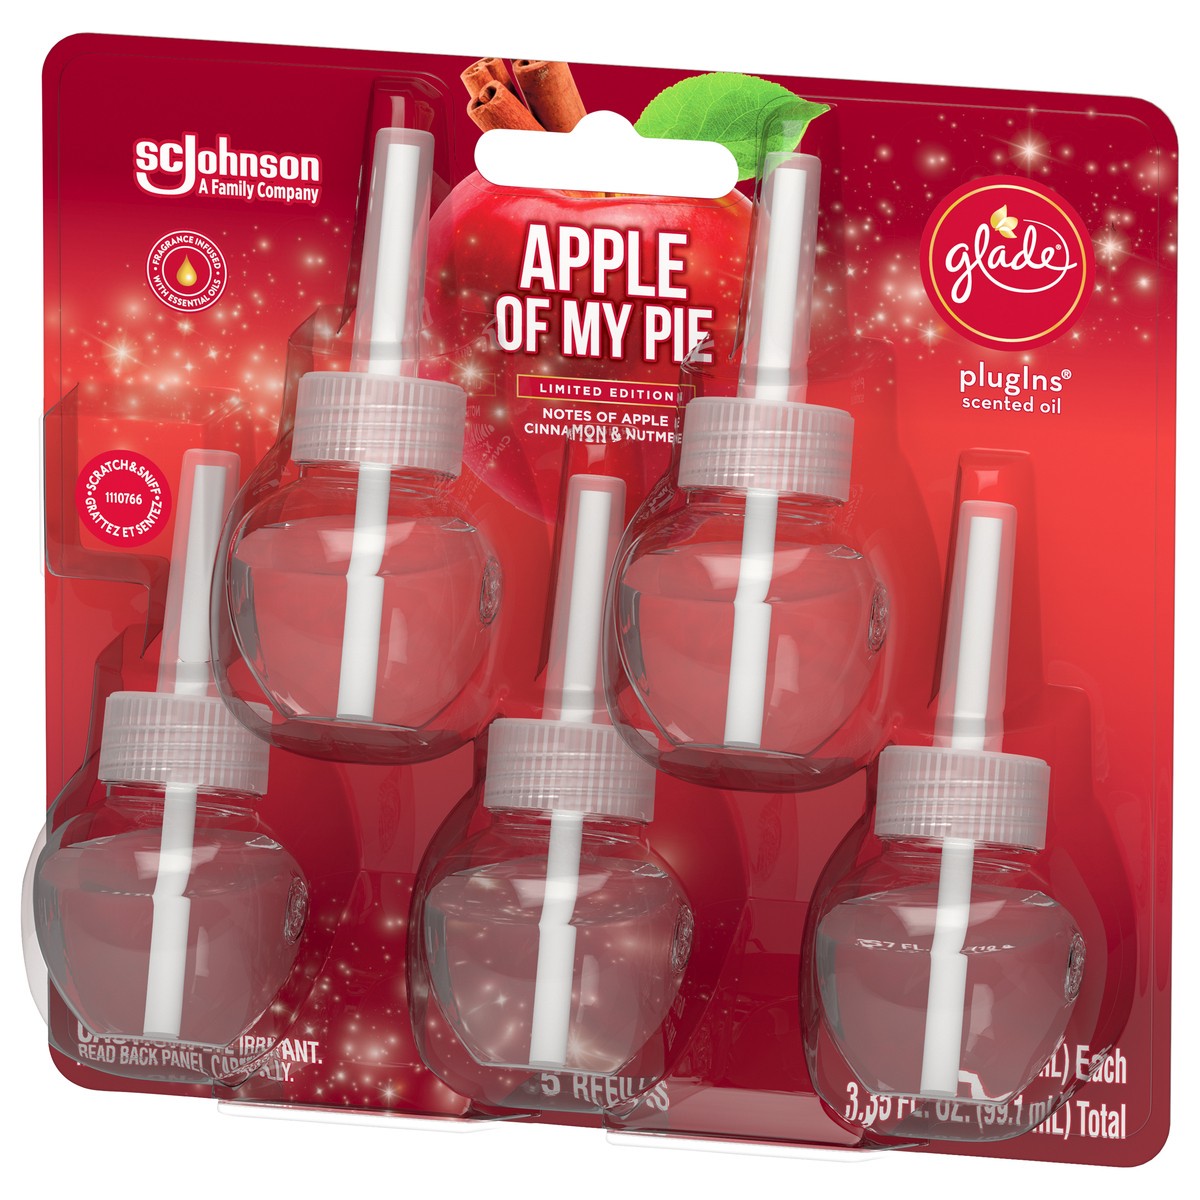 slide 3 of 5, Glade Plug In Refills, 5 Refills, Electric Scented Oil, Apple Of My Pie, 3.35 fl oz